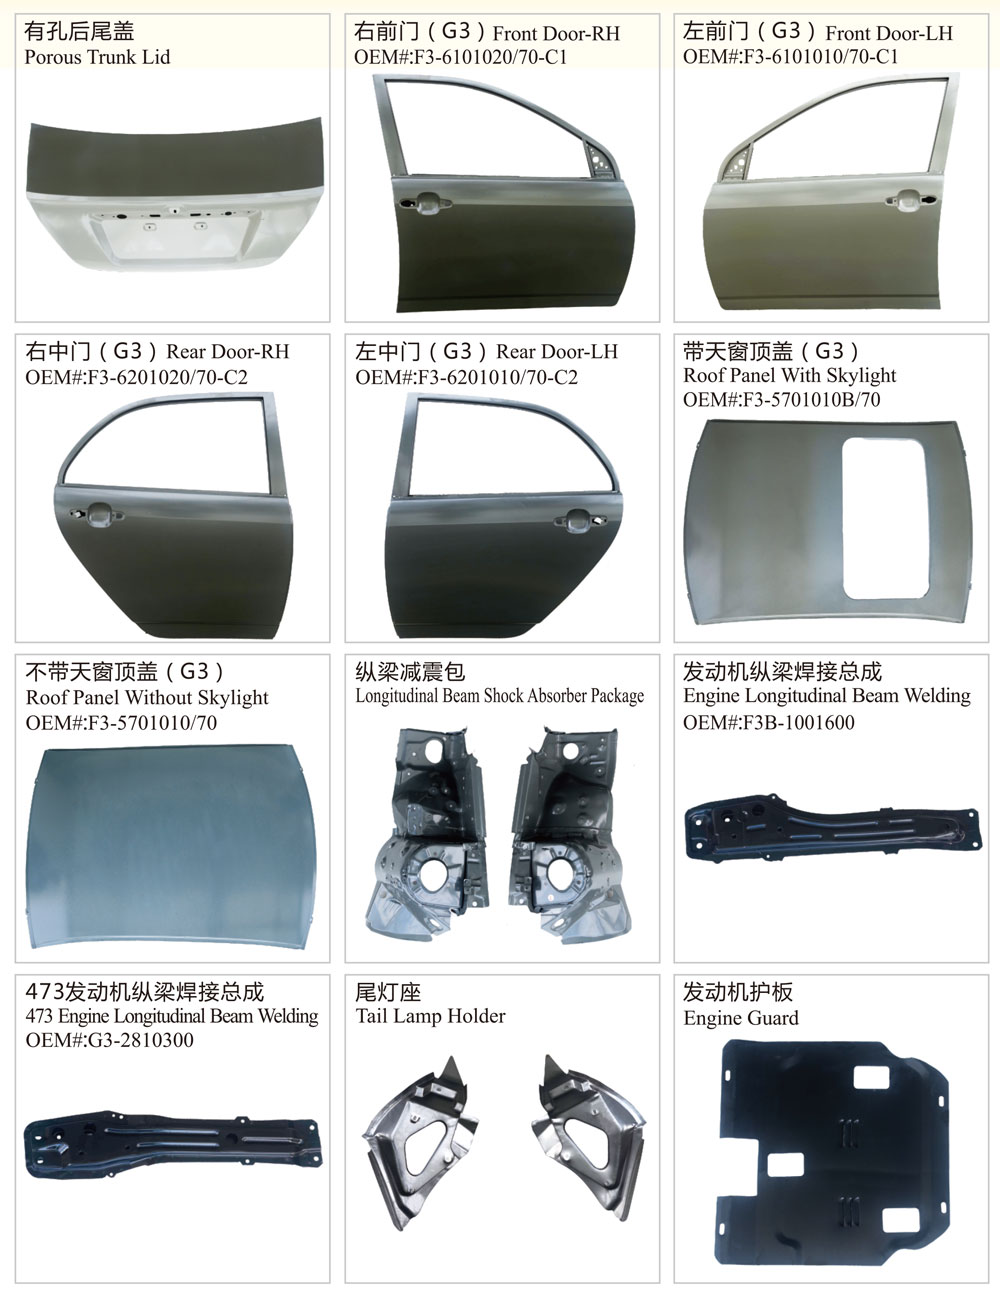 Byd F3 Front Bumper Reinforcement China Manufacturers